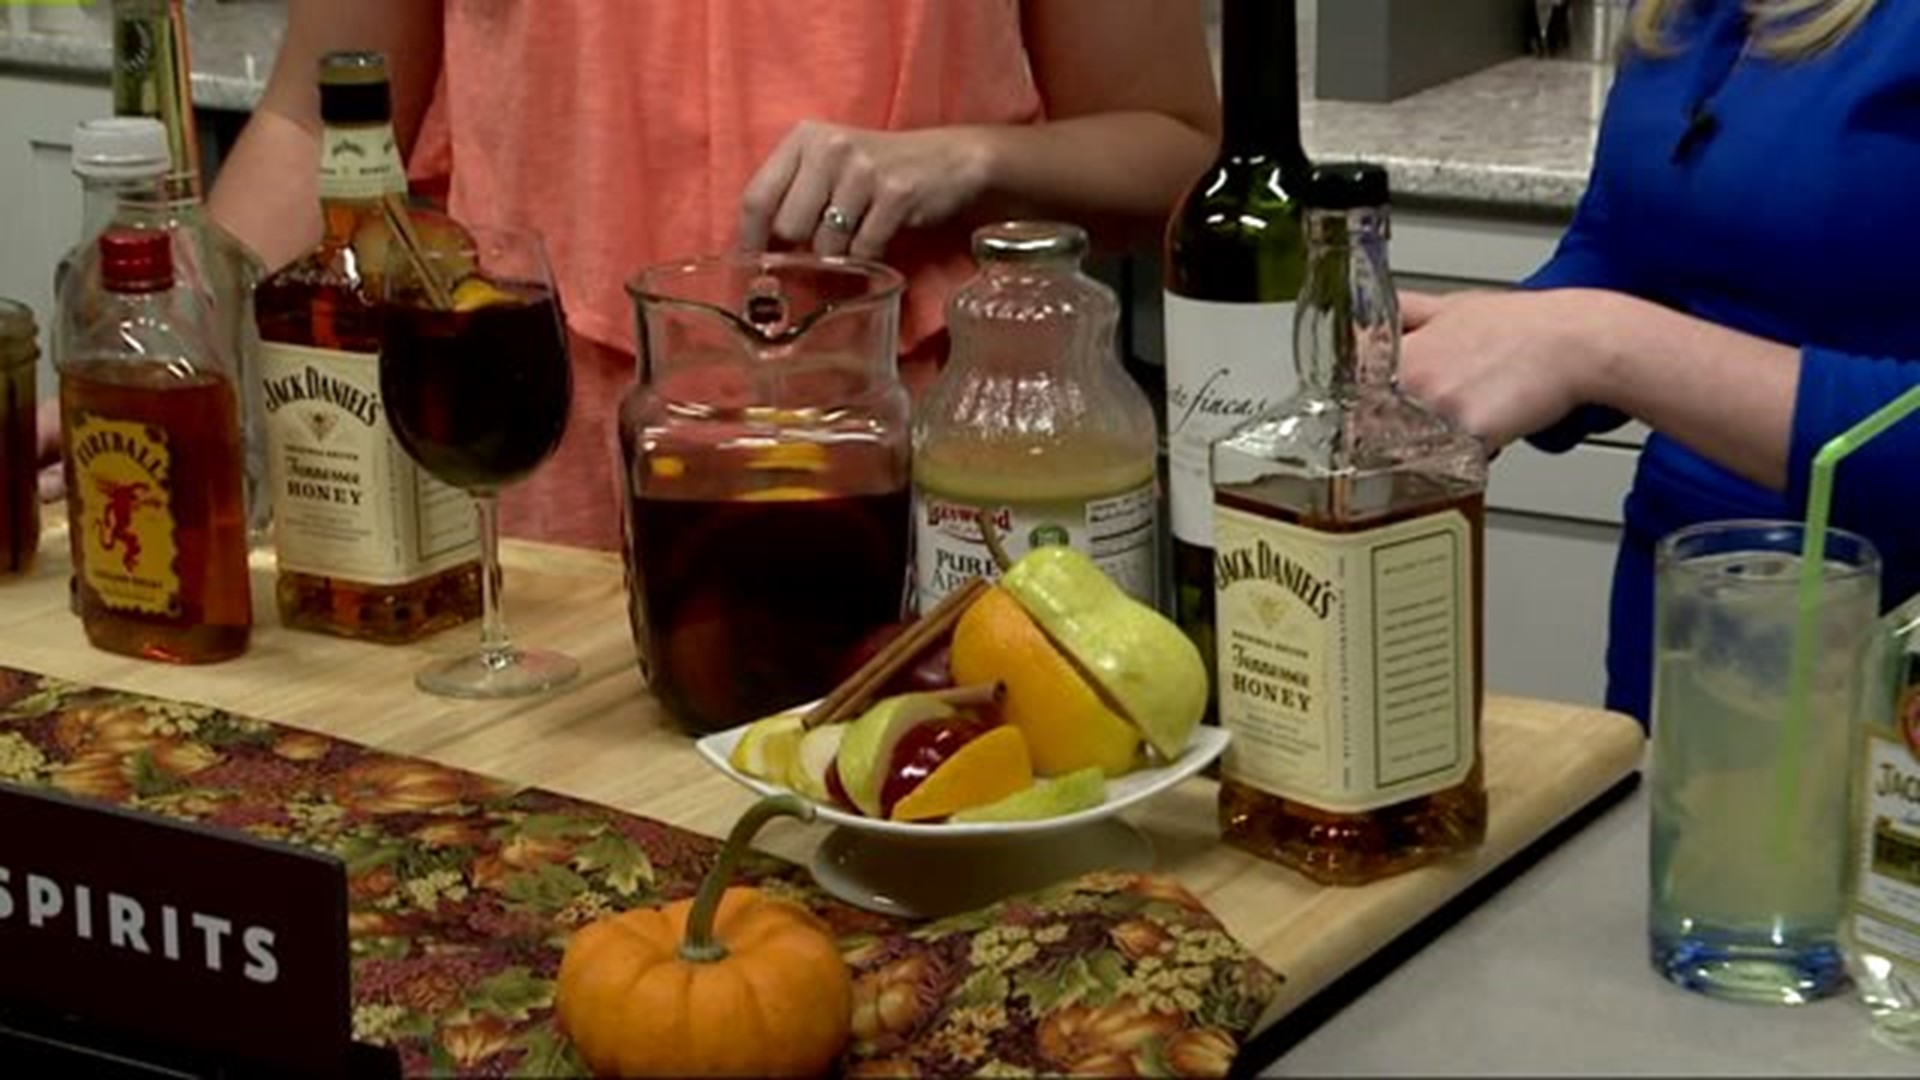 Get in the spirit of National Honey Month with these drink recipes